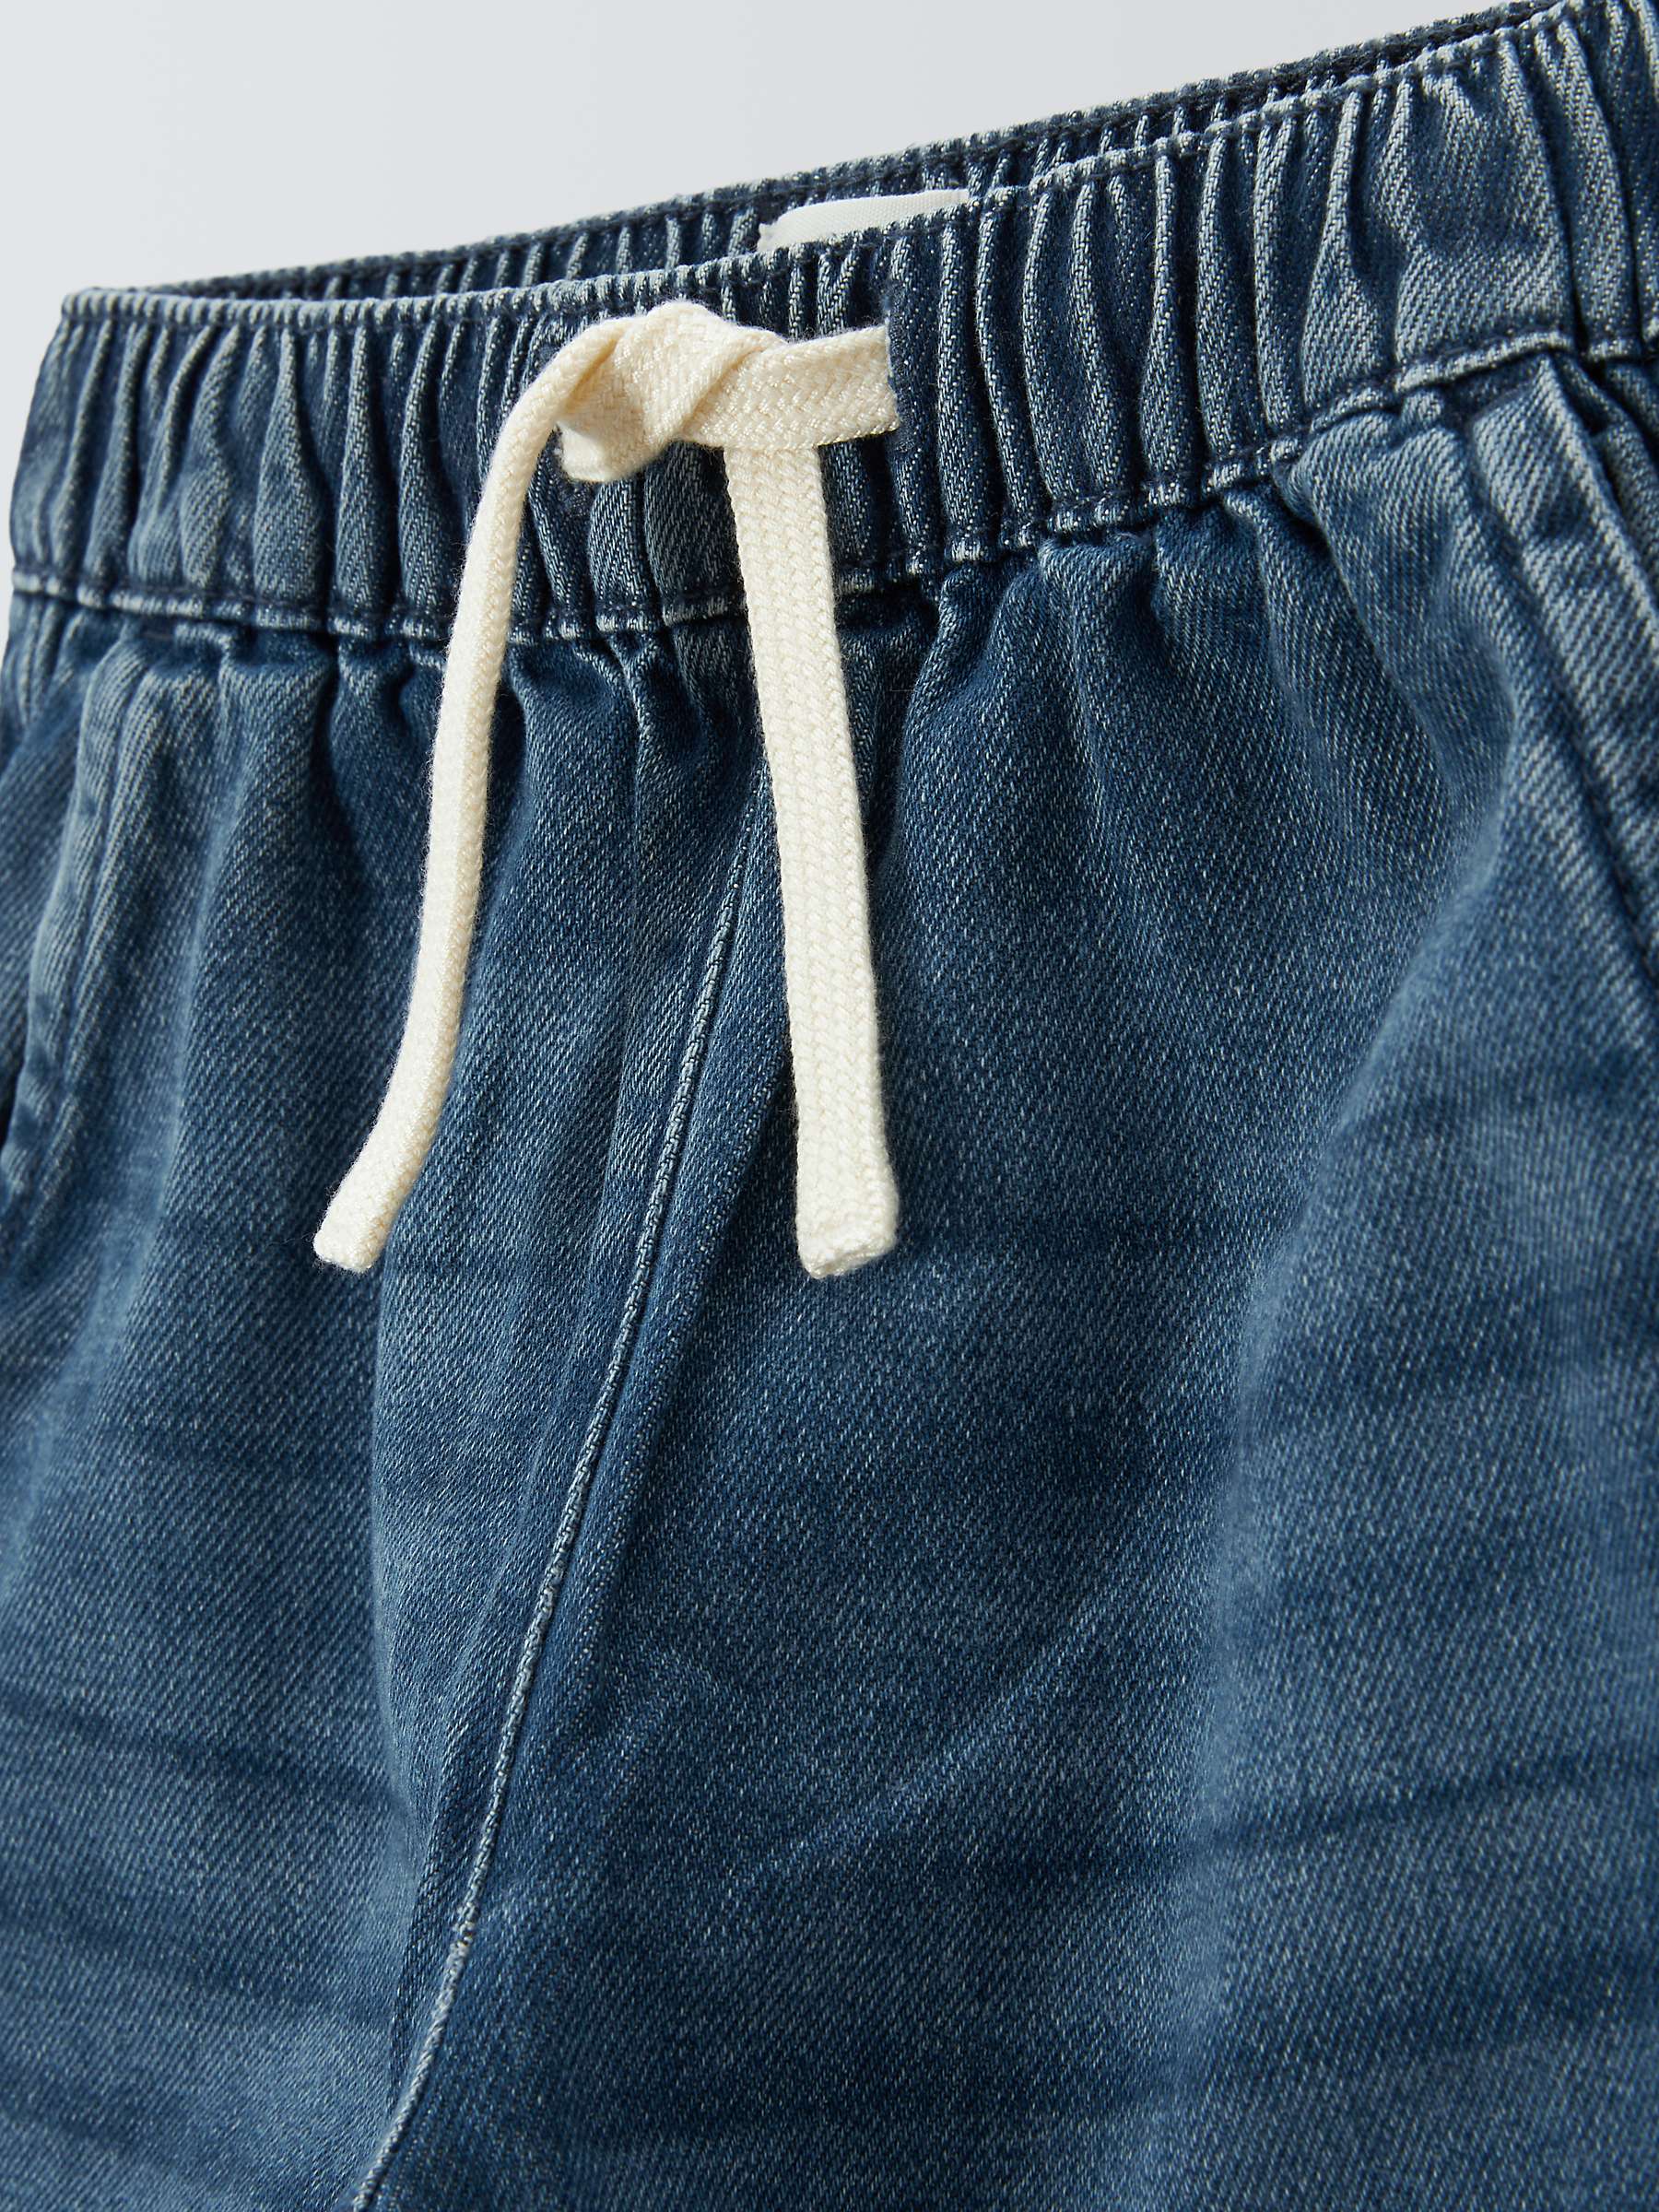 Buy John Lewis ANYDAY Boy's Denim Pull-On Trousers, Blue Online at johnlewis.com